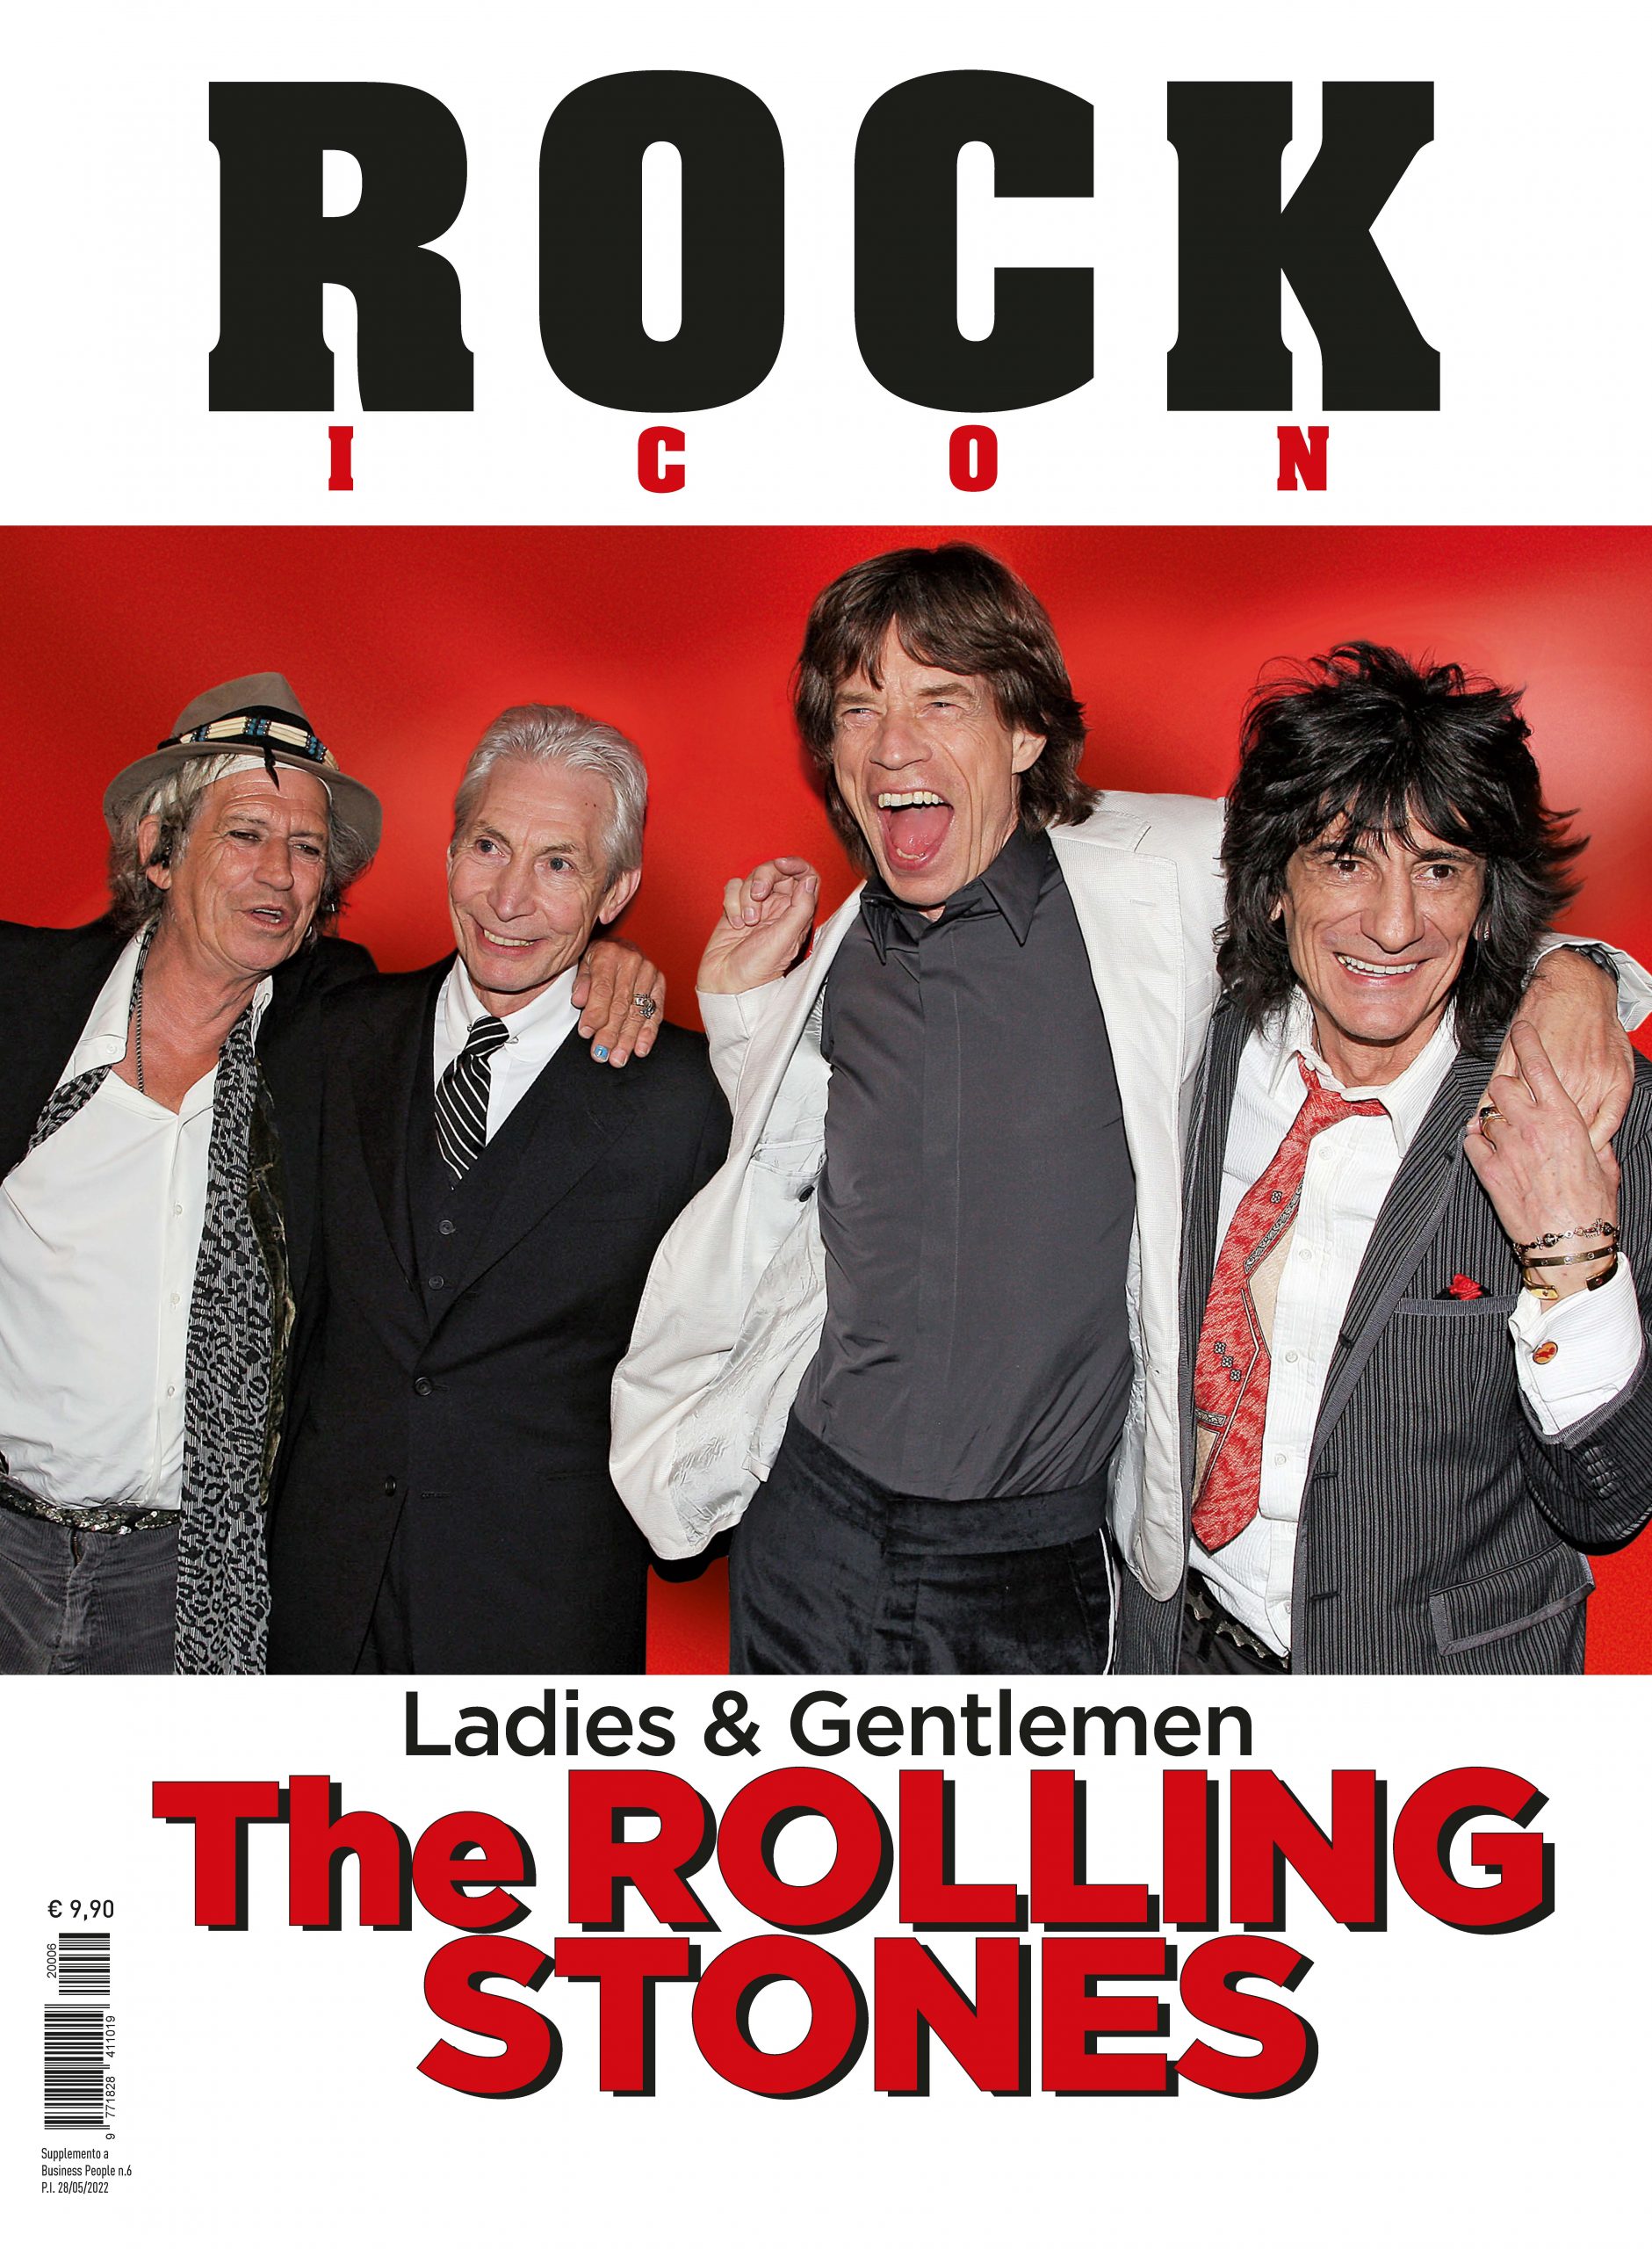 Speciale Rolling Stones